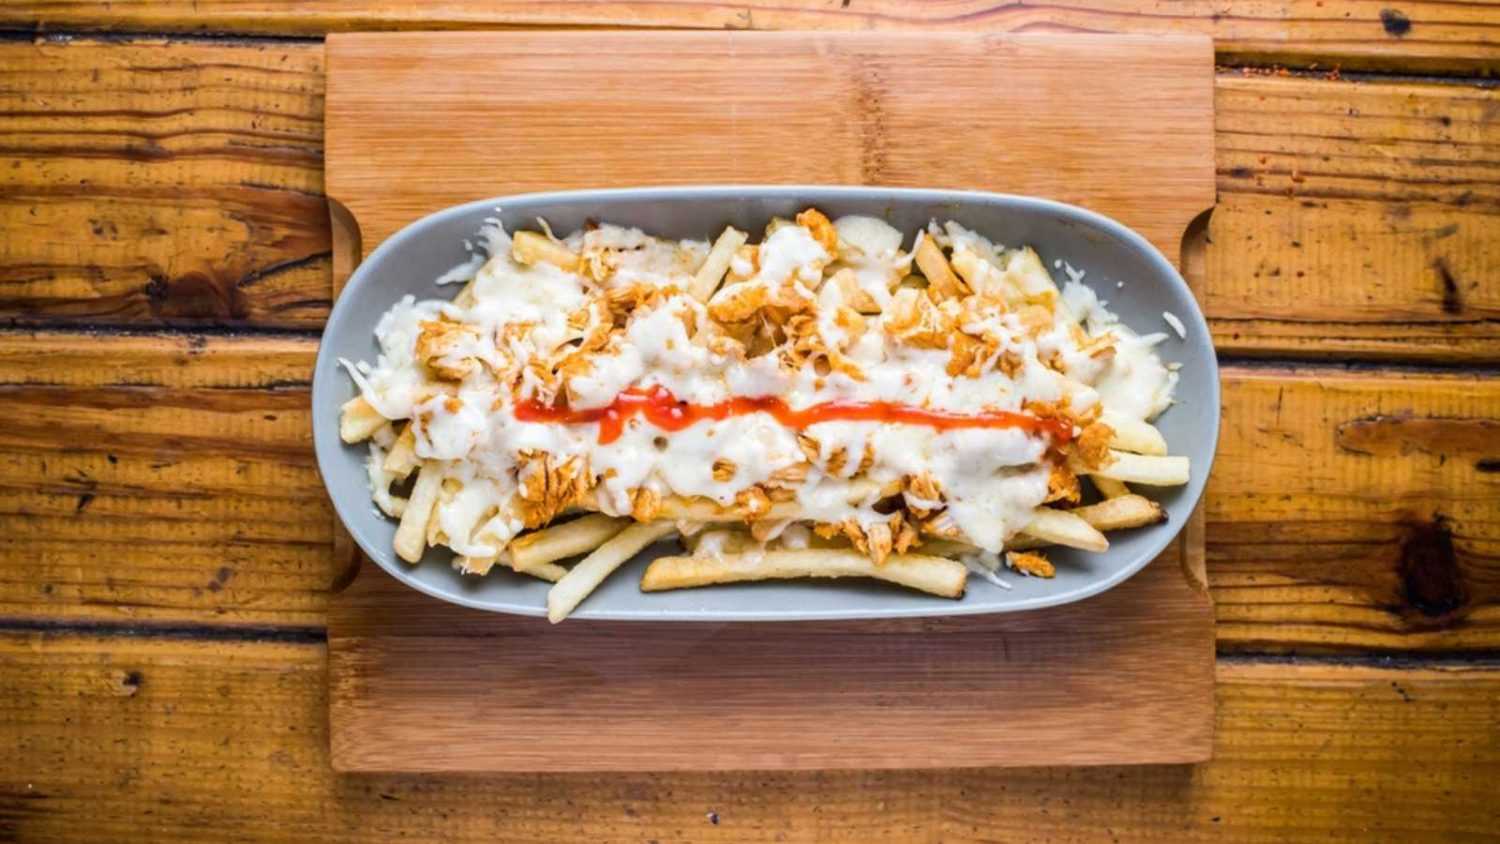 Poutin fries loaded with mayo dip isolated on wooden board top view on table fastfood